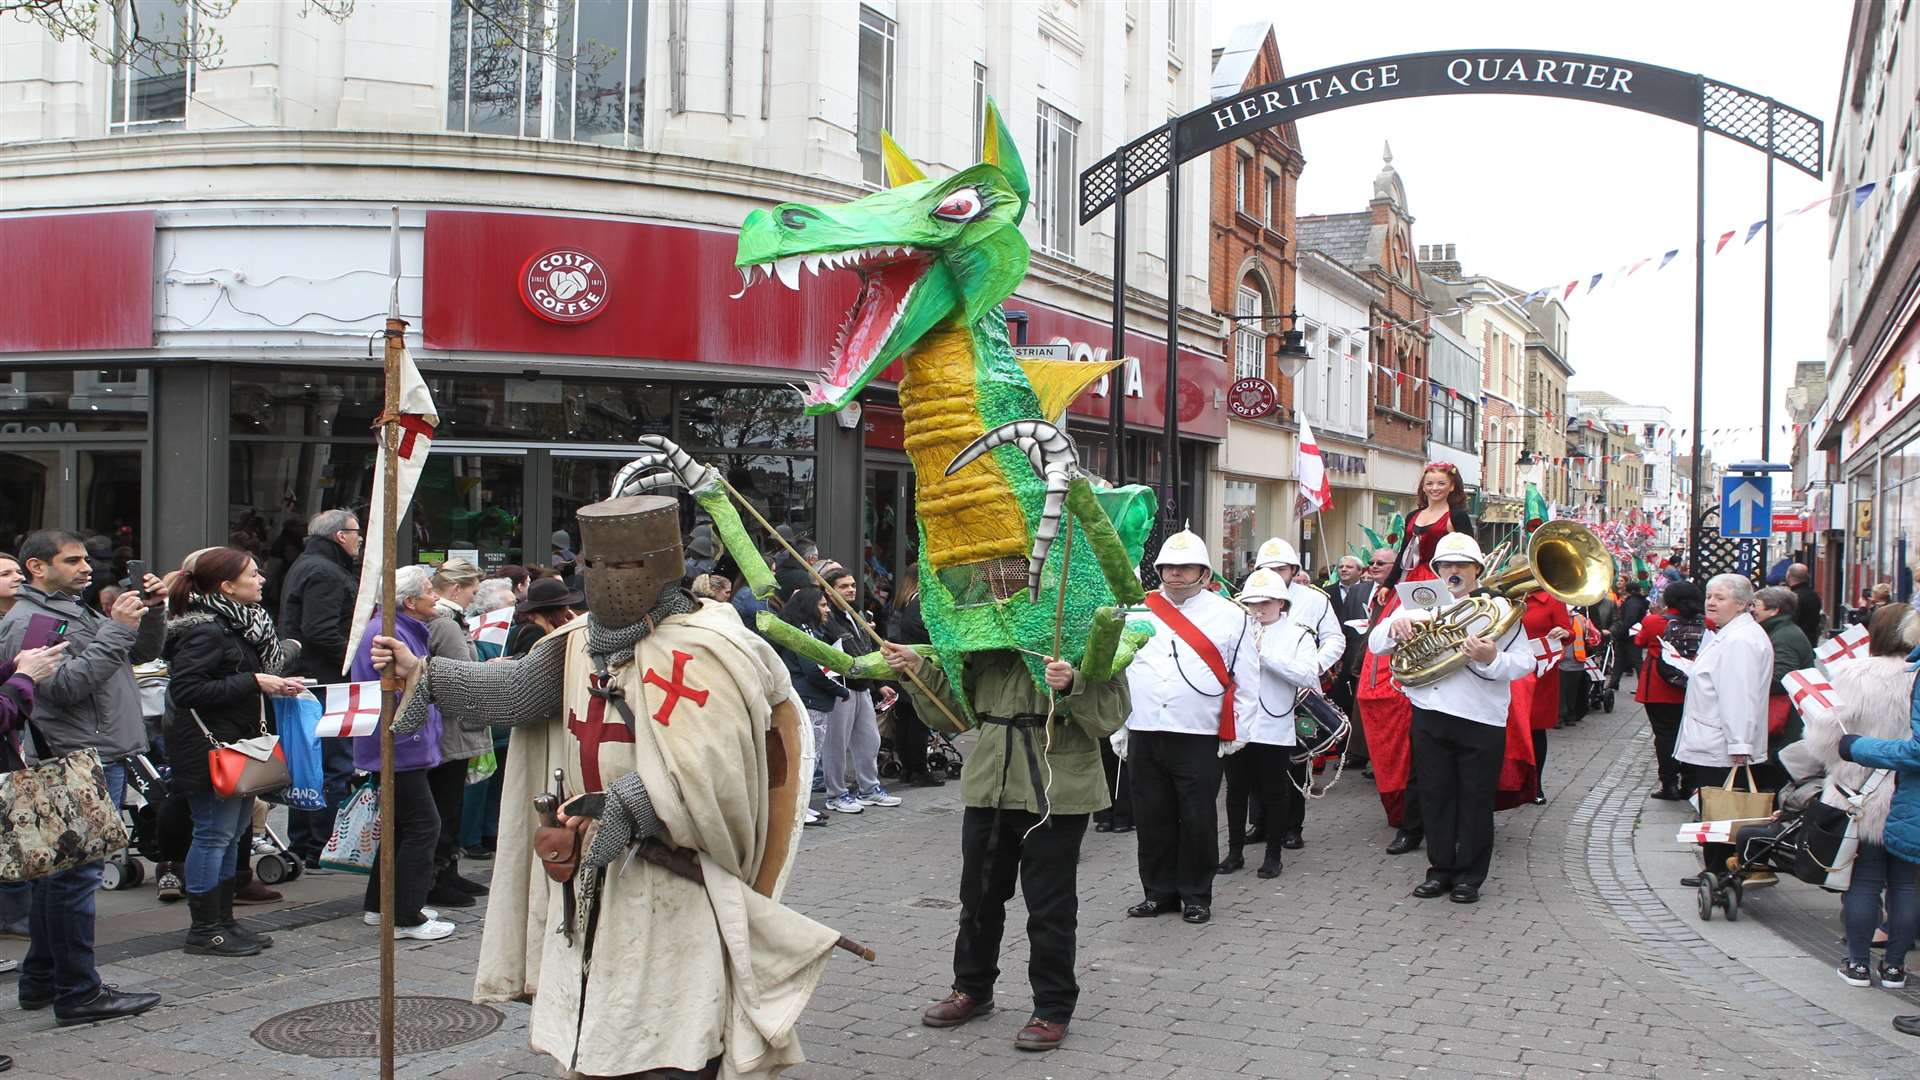 St George leads the way in last year's parade. Picture: John Westhrop